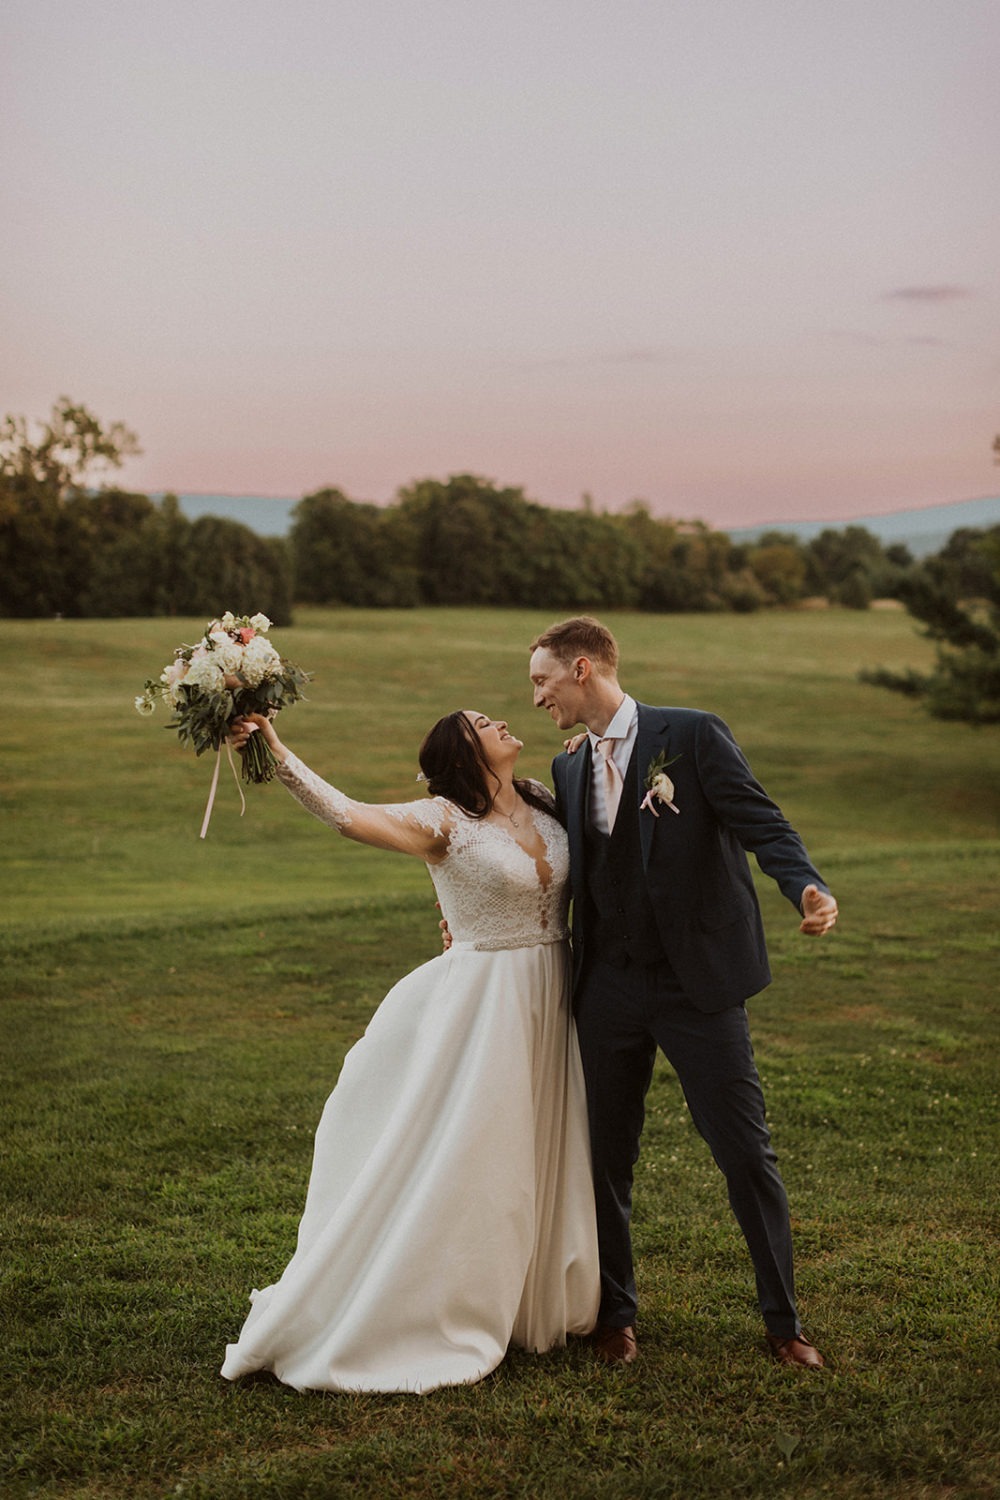 Couple embraces with bouquet in the air at farm sunset wedding